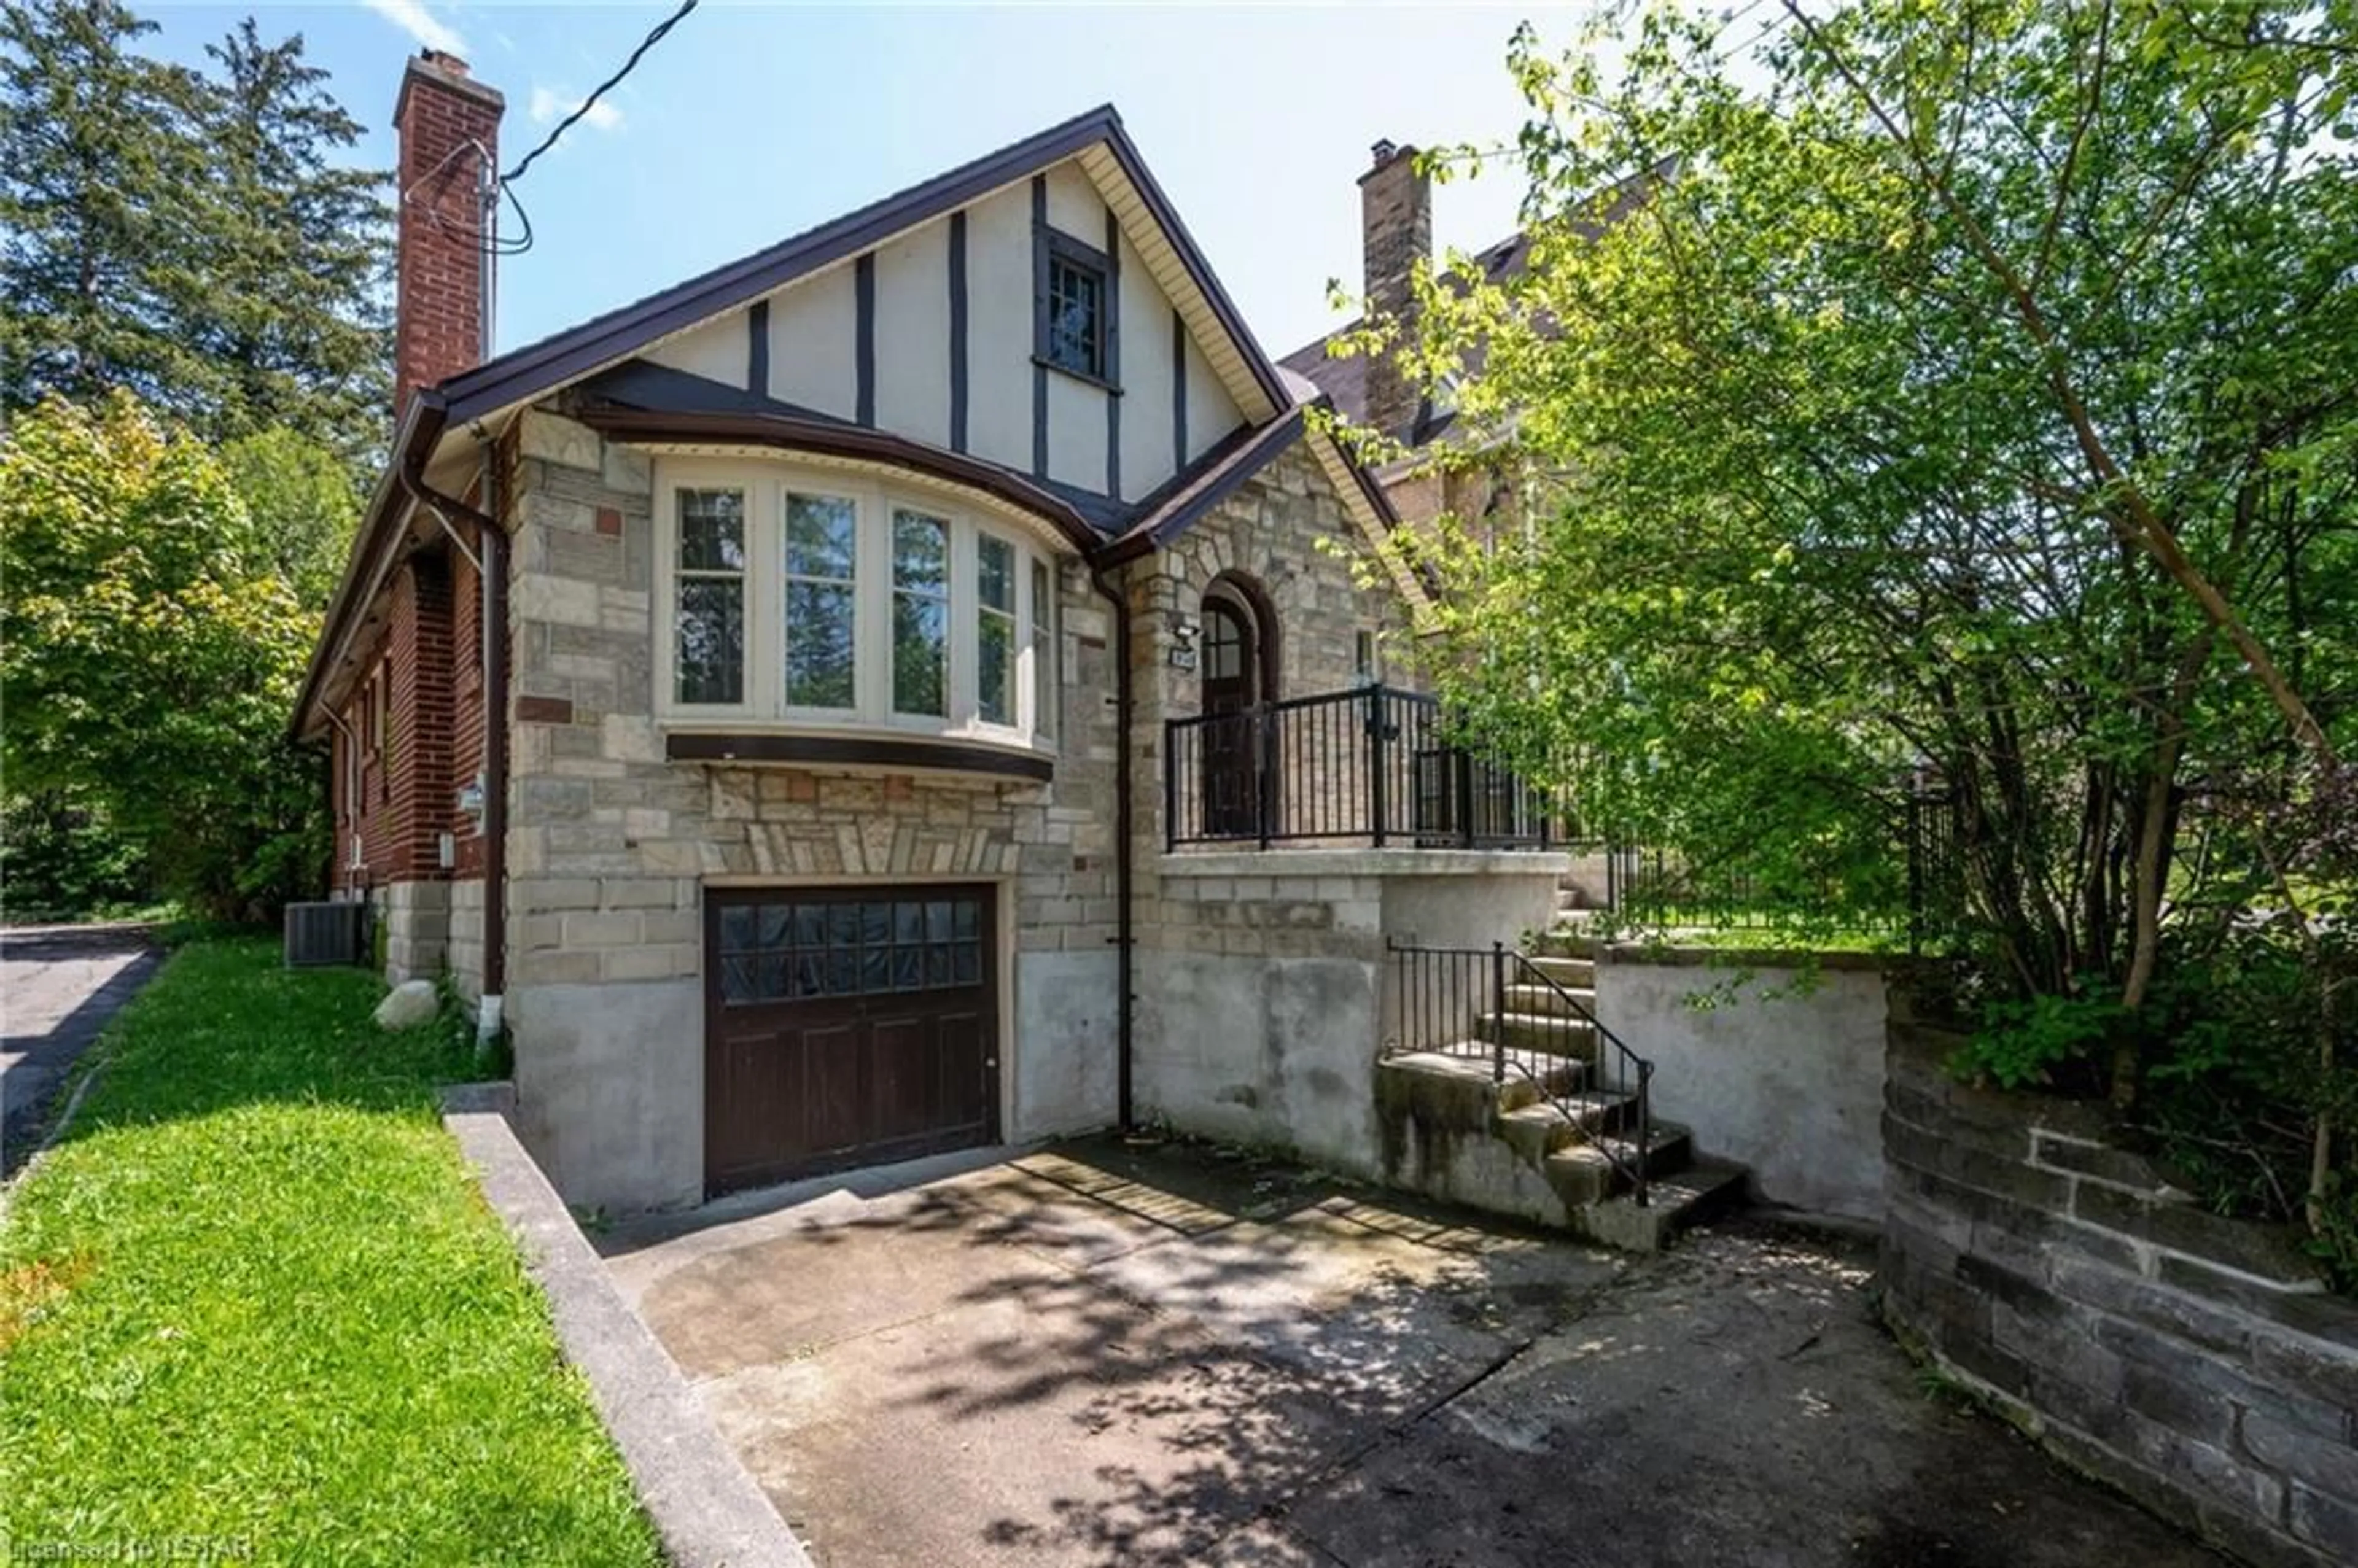 Home with brick exterior material for 1090 Richmond St, London Ontario N6A 3K2